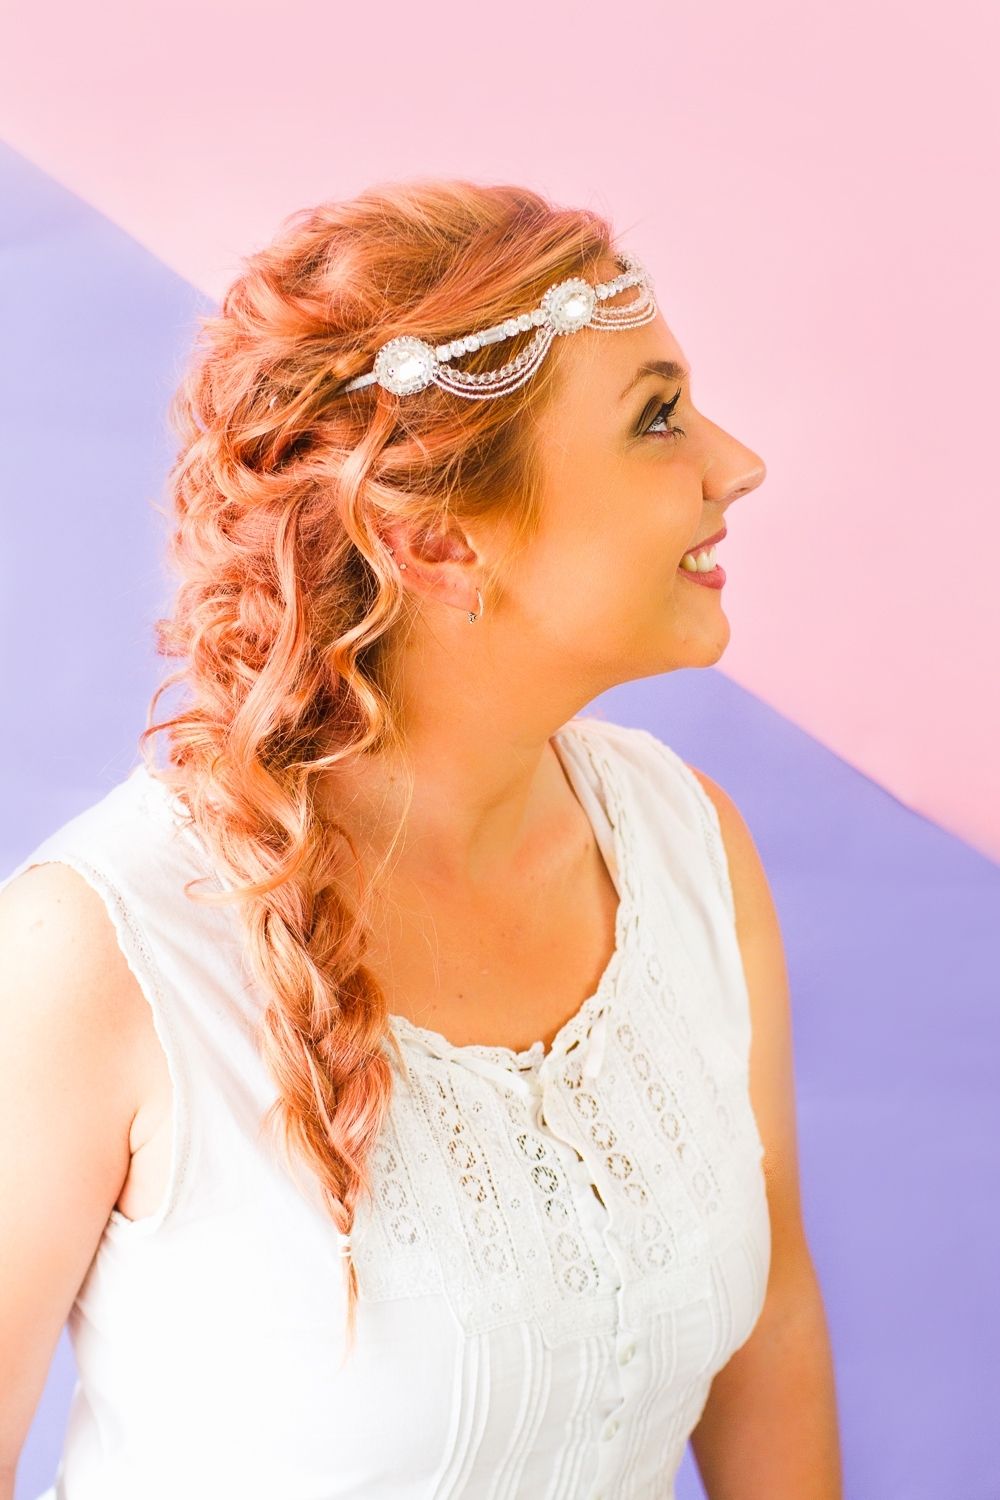 How To Wear Wedding Headband With Hairstyle Wedding Headpieces Throughout Current Quirky Wedding Hairstyles (View 8 of 15)